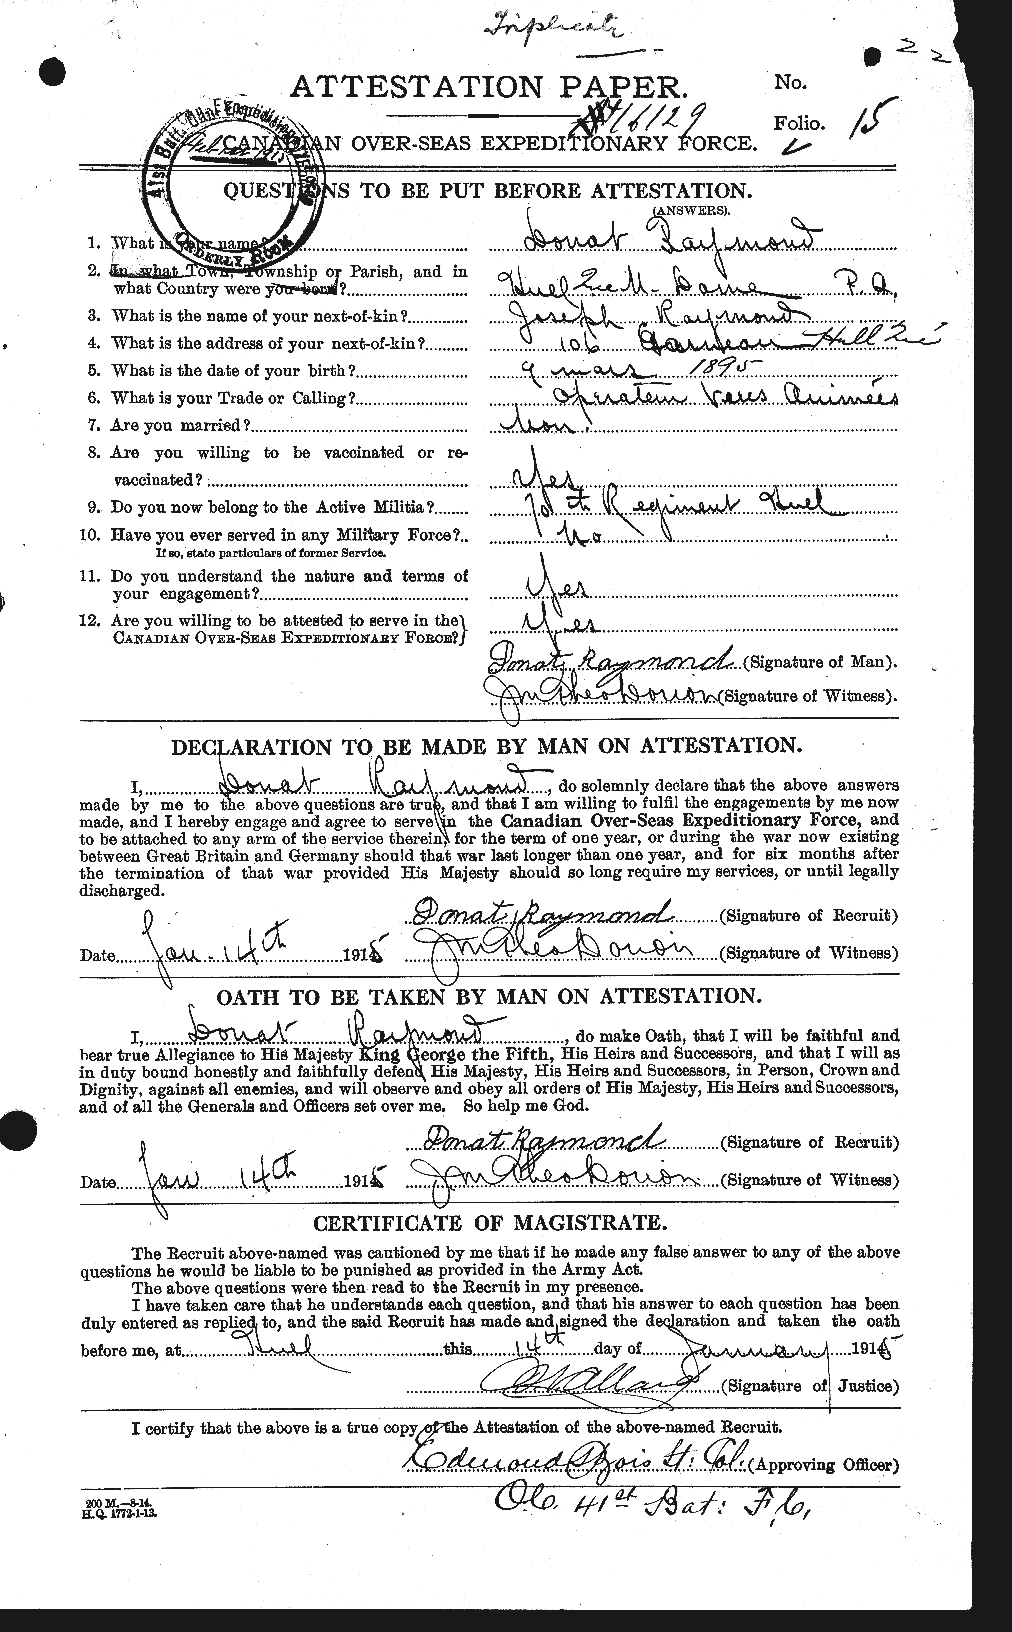 Personnel Records of the First World War - CEF 595300a